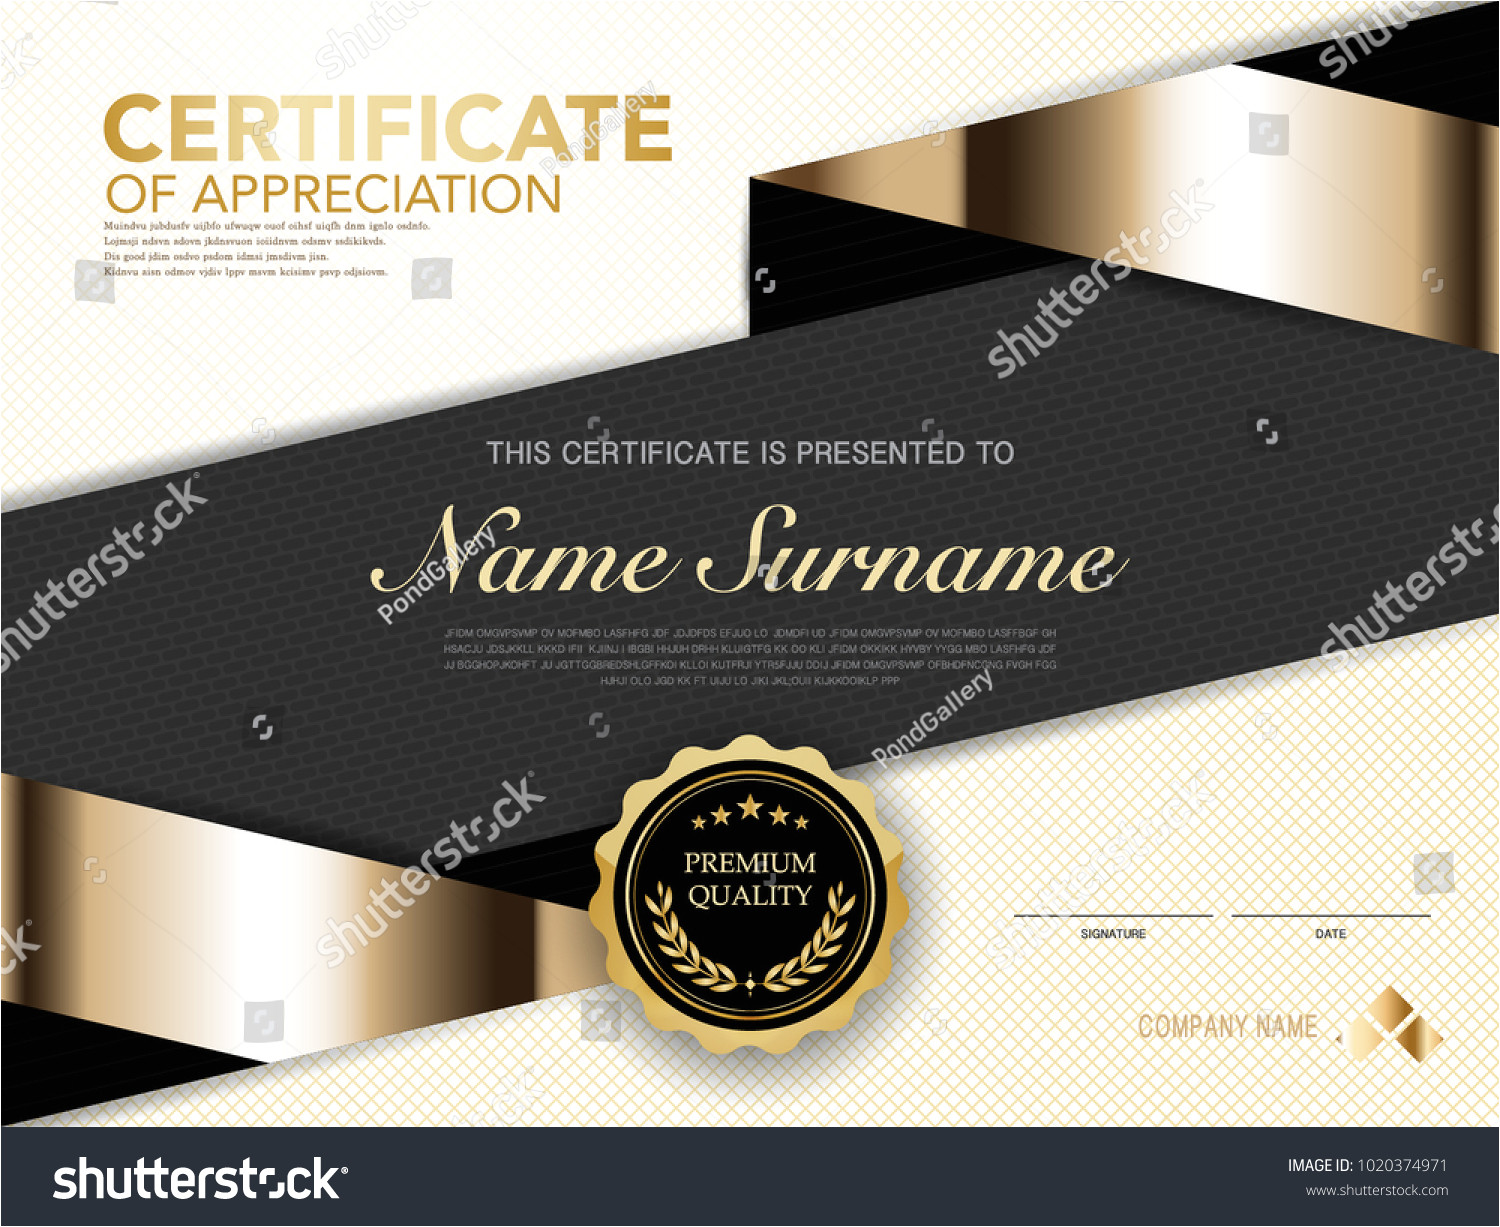 stock vector diploma certificate template black and gold color with luxury and modern style vector image 1020374971 jpg